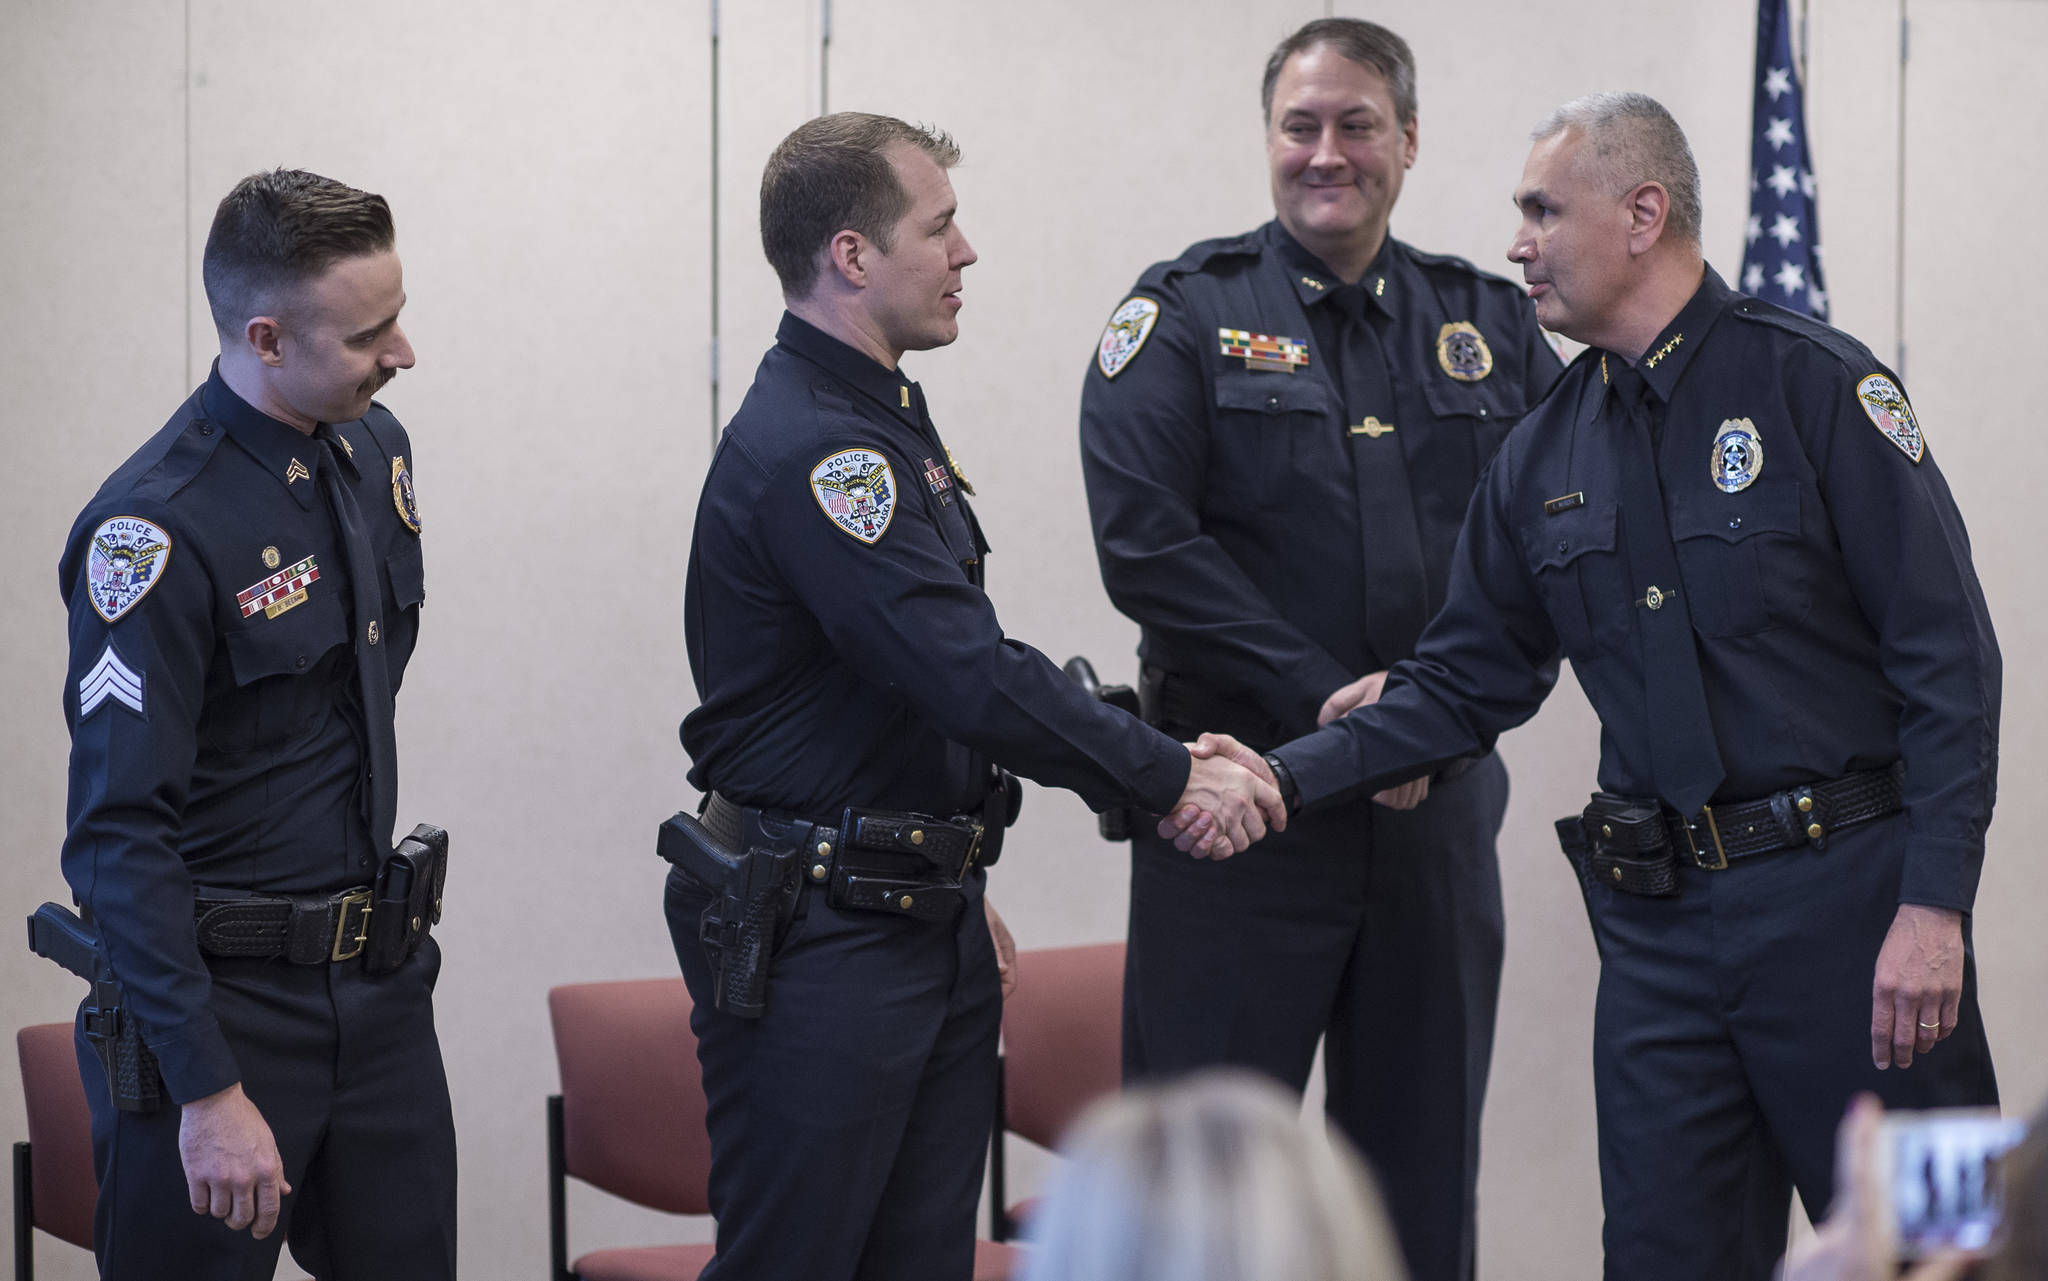 Juneau Police Department Chief Ed Mercer, right, congratulates Deputy Chief David Campbell, second from right, Lt. Krag Campbell, and Sgt. Ben Beck, left, during a promotions ceremony at the police station on Monday, Oct. 30, 2017. (Michael Penn | Juneau Empire File)